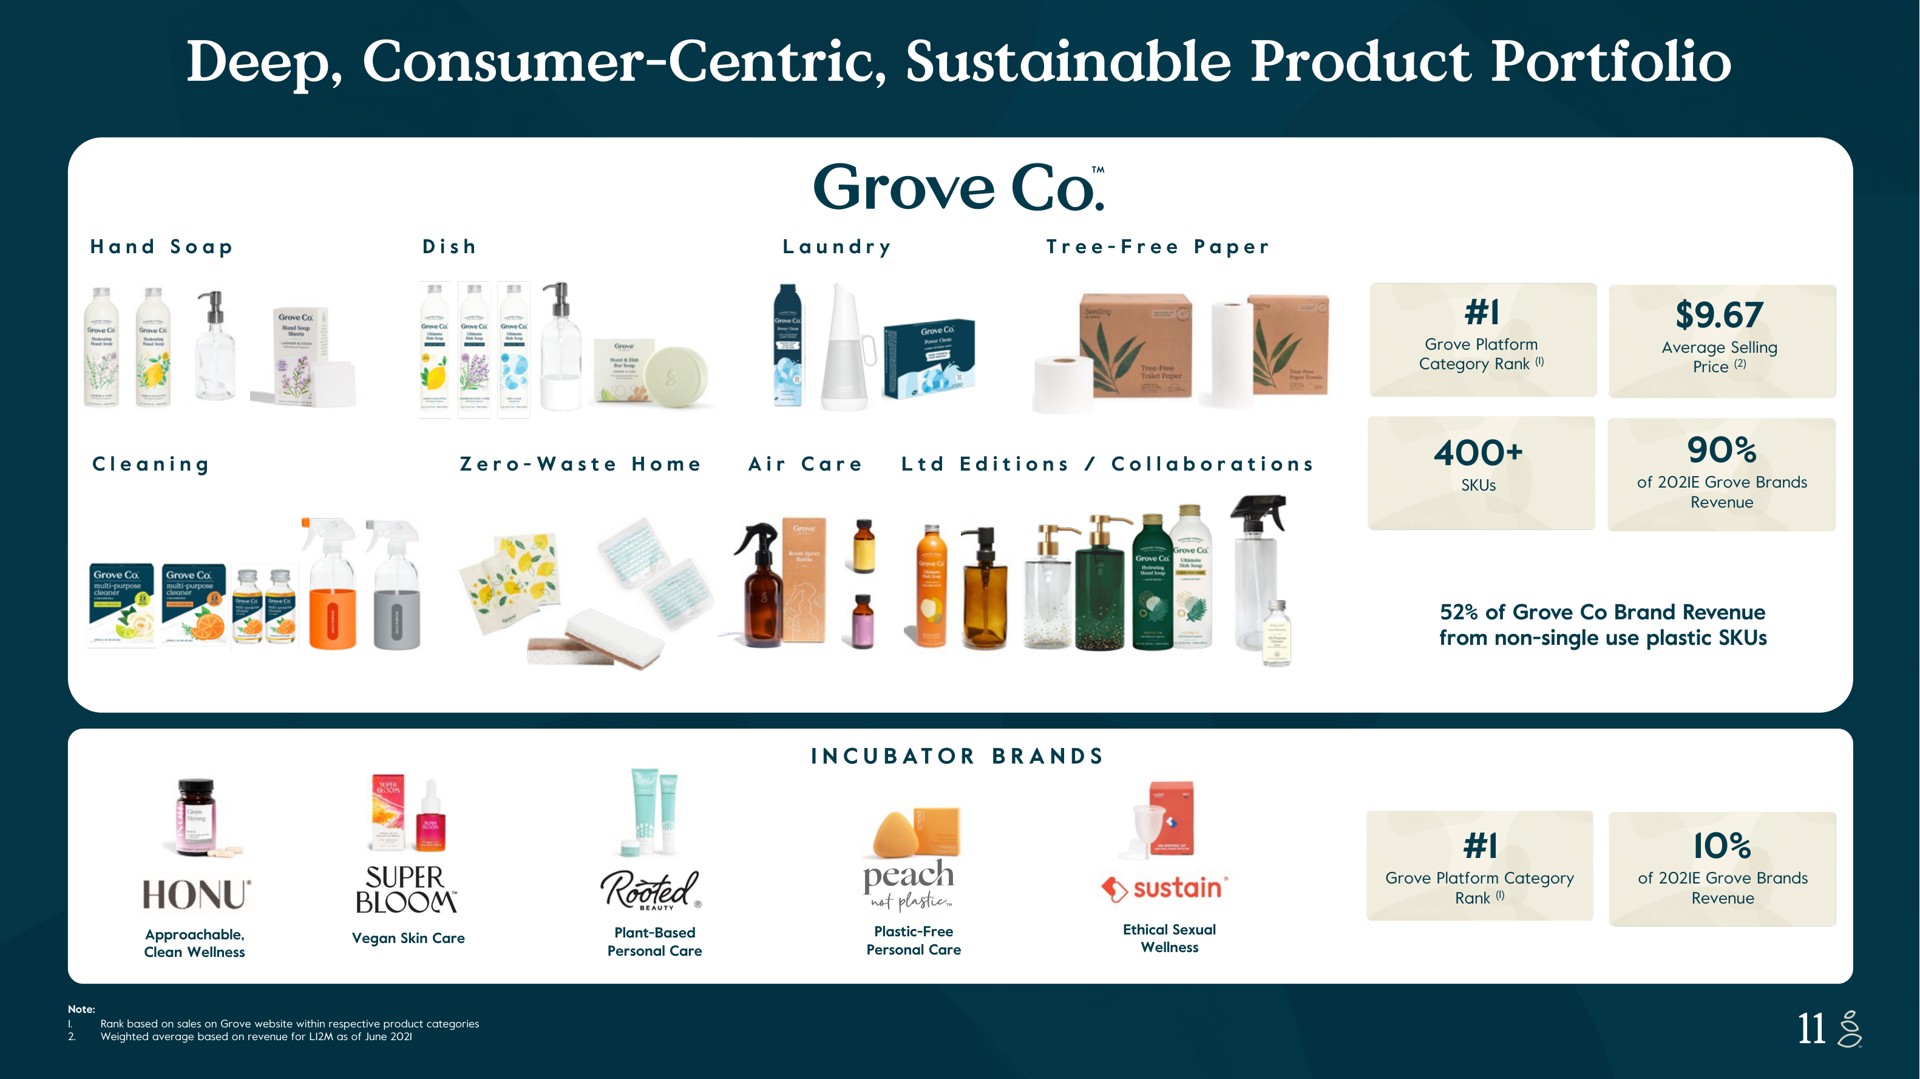 deep consumer centric sustainable product portfolio hand soap tree free paper grove grove platform category rank average selling price air care cleaning editions collaborations revenue of grove brand revenue from non single use plastic i pee nee near super bloom skin care grove platform category rank incubator brands of grove brands revenue pea approachable clean wellness plant based personal care plastic free personal care ethical sexual wellness sustain of grove brands rank based on sales on grove within massel a | Grove